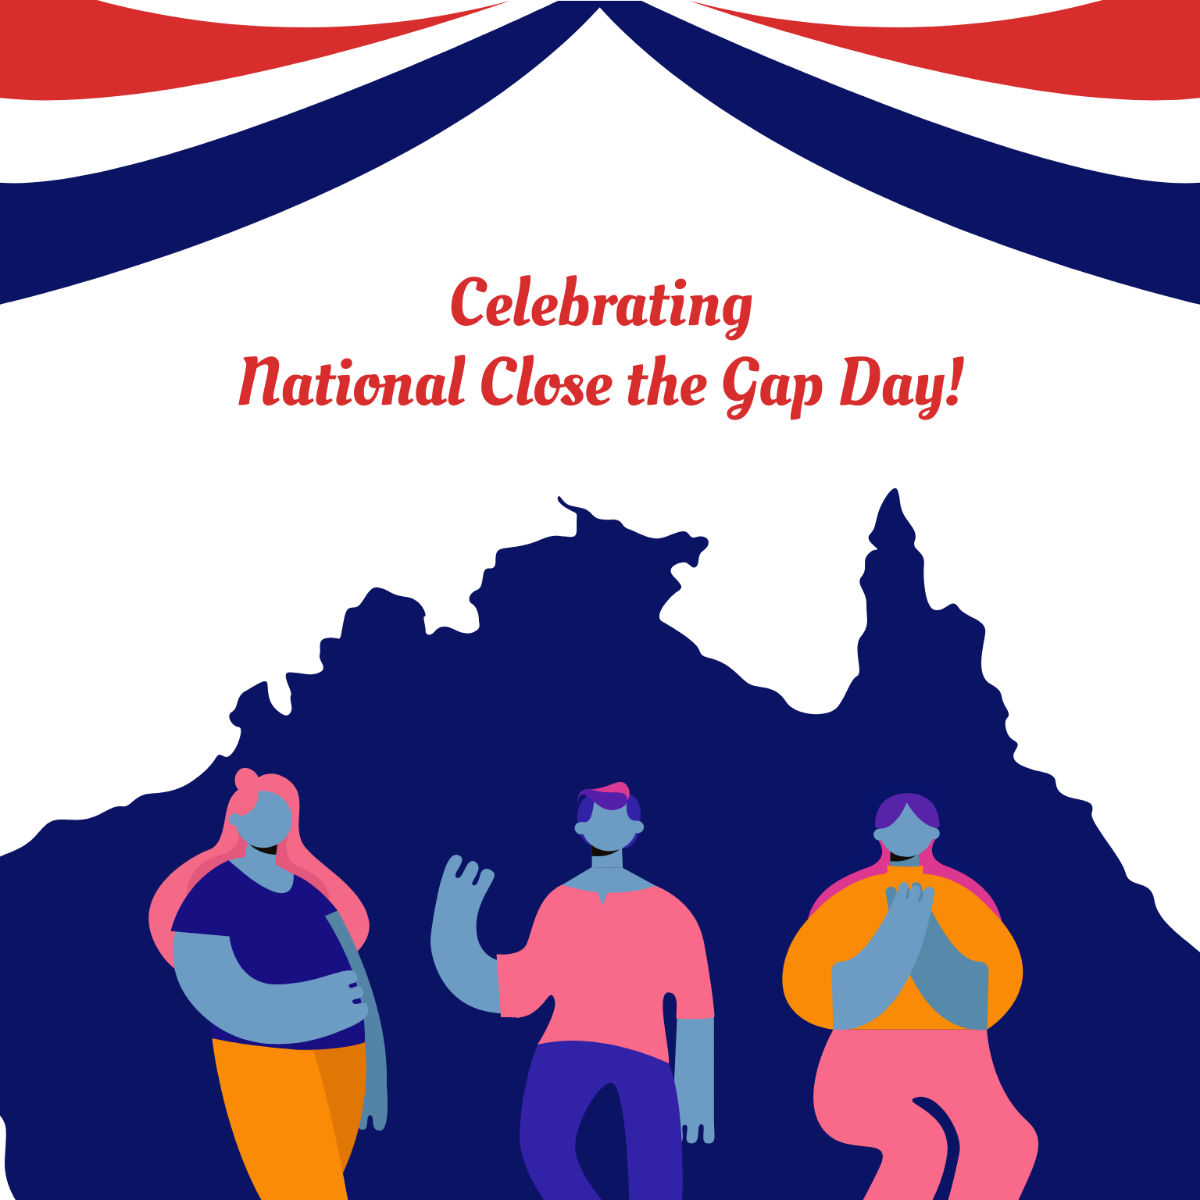 Free National Close the Gap Day Celebration Vector Template